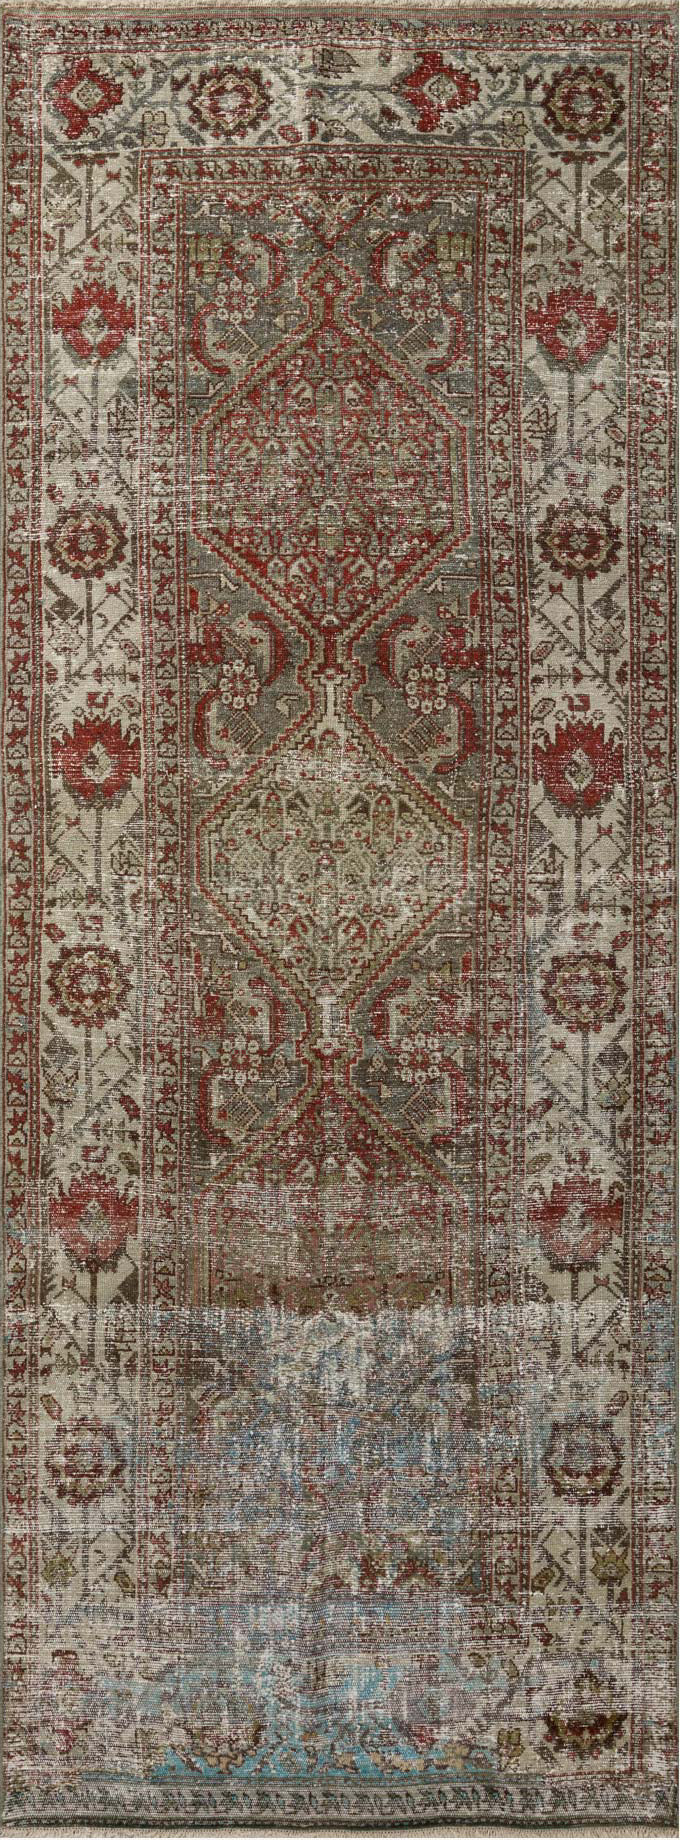 Loloi Persian One of a Kind Red Area Rug main image